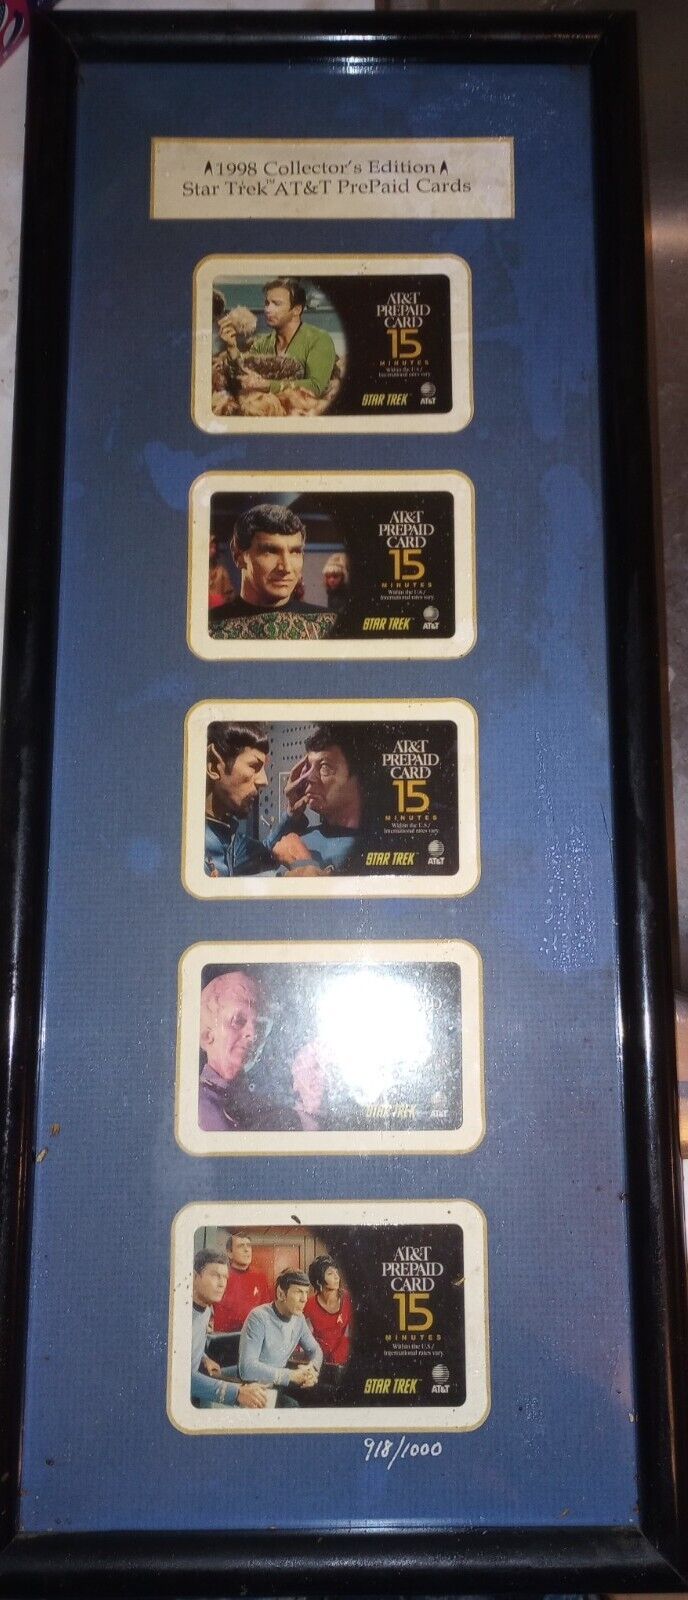 New 1998 Star Trek Original Series AT&T Prepaid Cards Collector's Edition